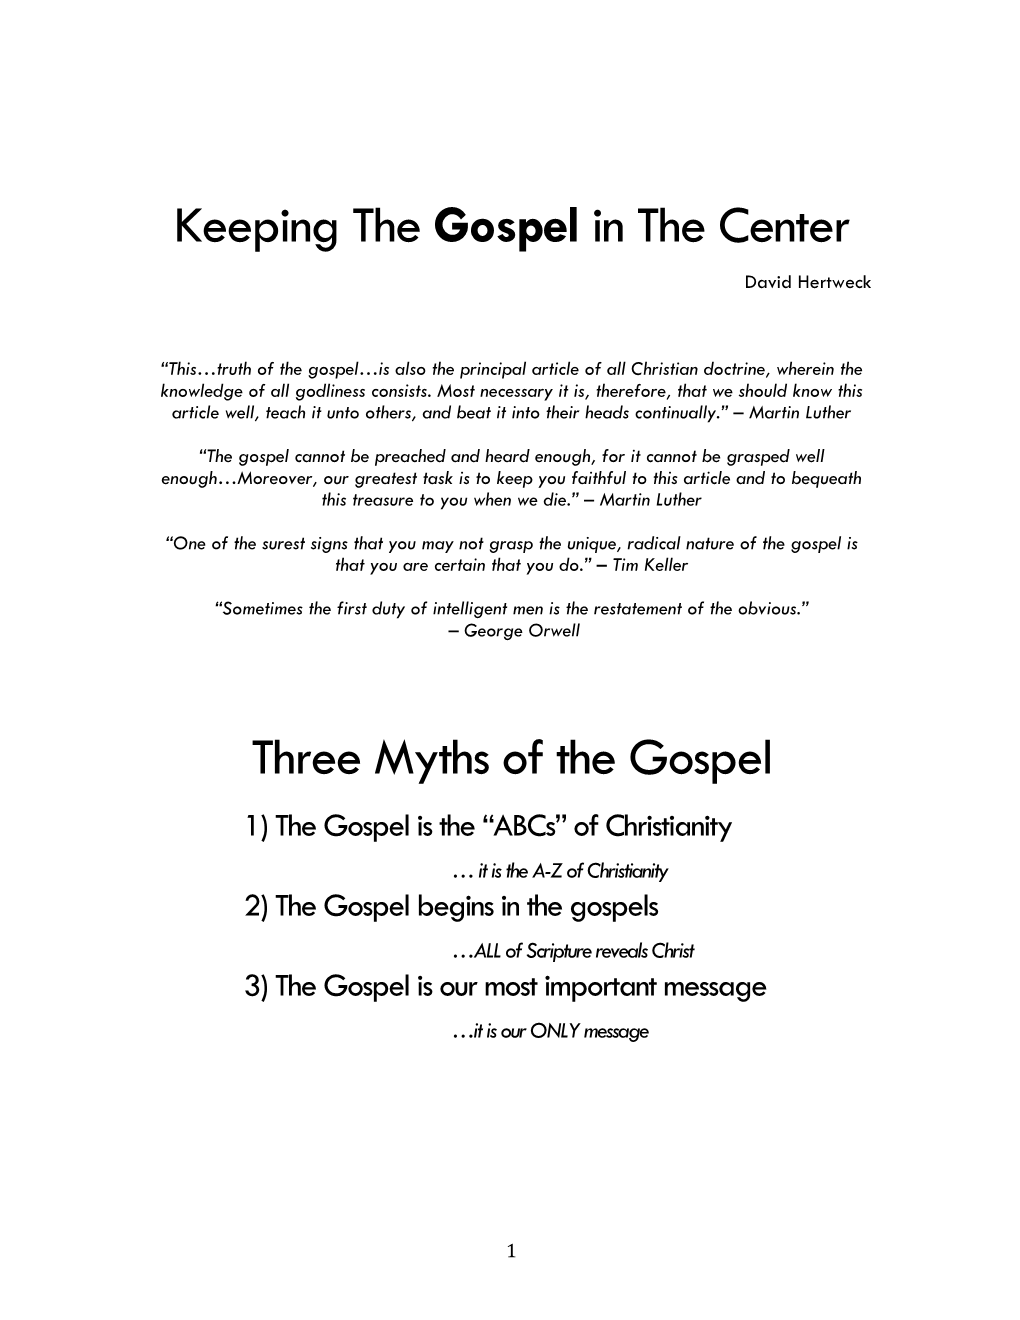 Keeping the Gospel in the Center Three Myths of the Gospel